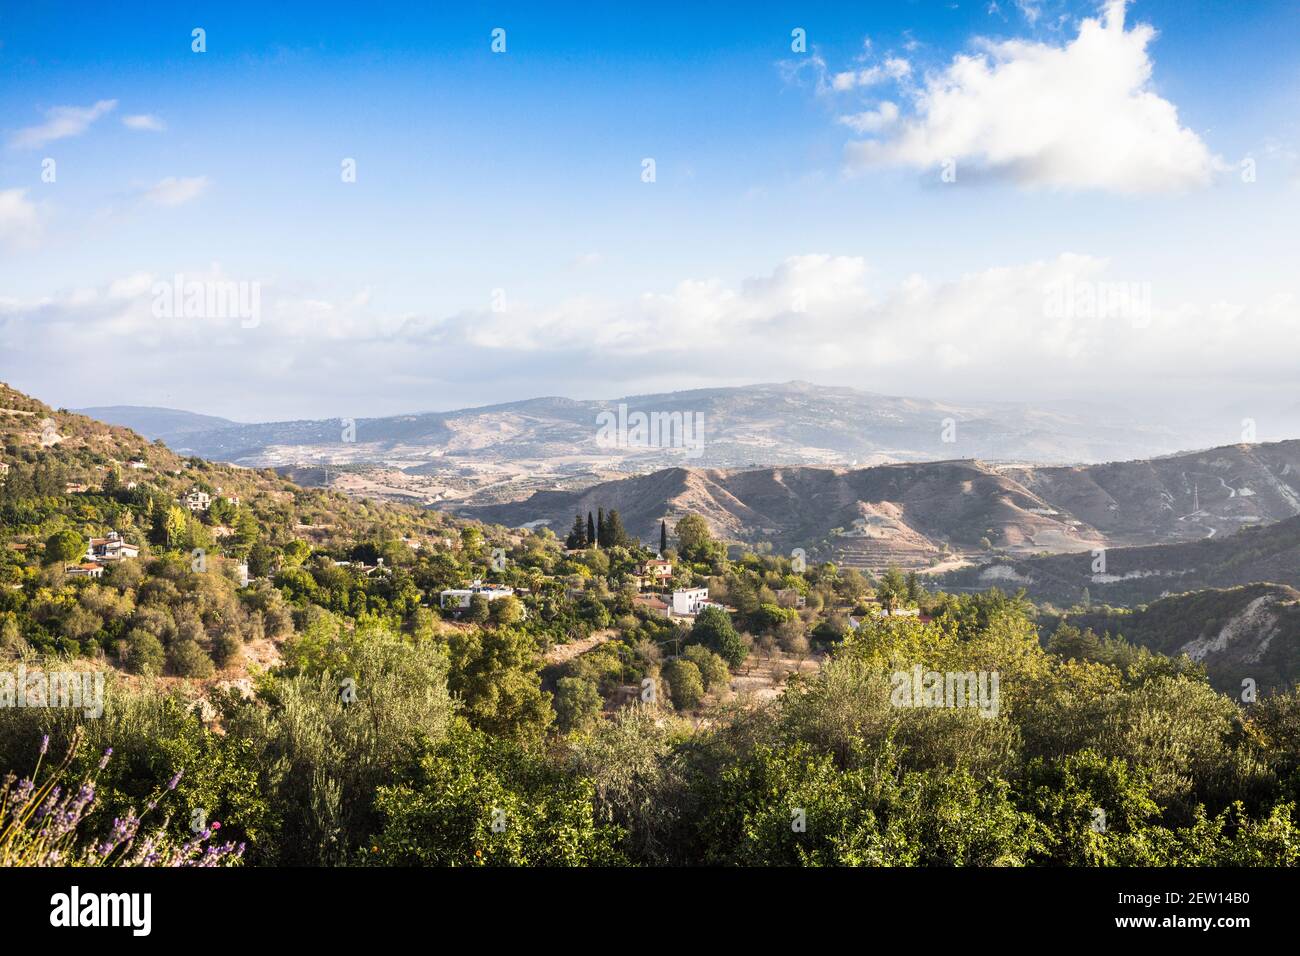 View from a little hillside village in Cyprus, overlooking hills and the Troodos mountains Stock Photo